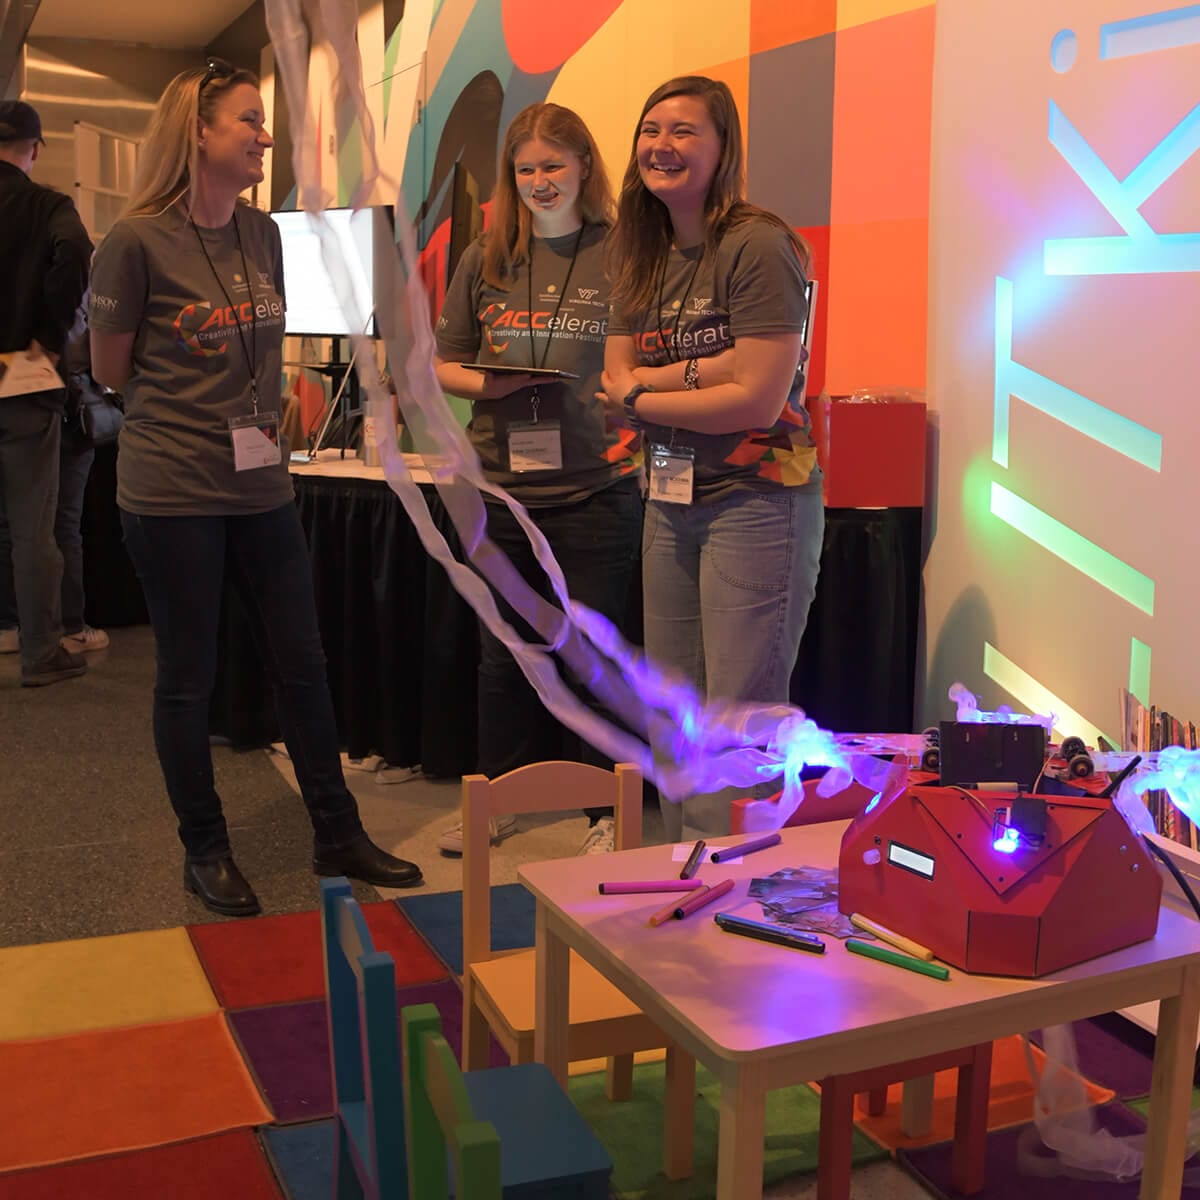 Clemson students providing a display during an innovation festival.